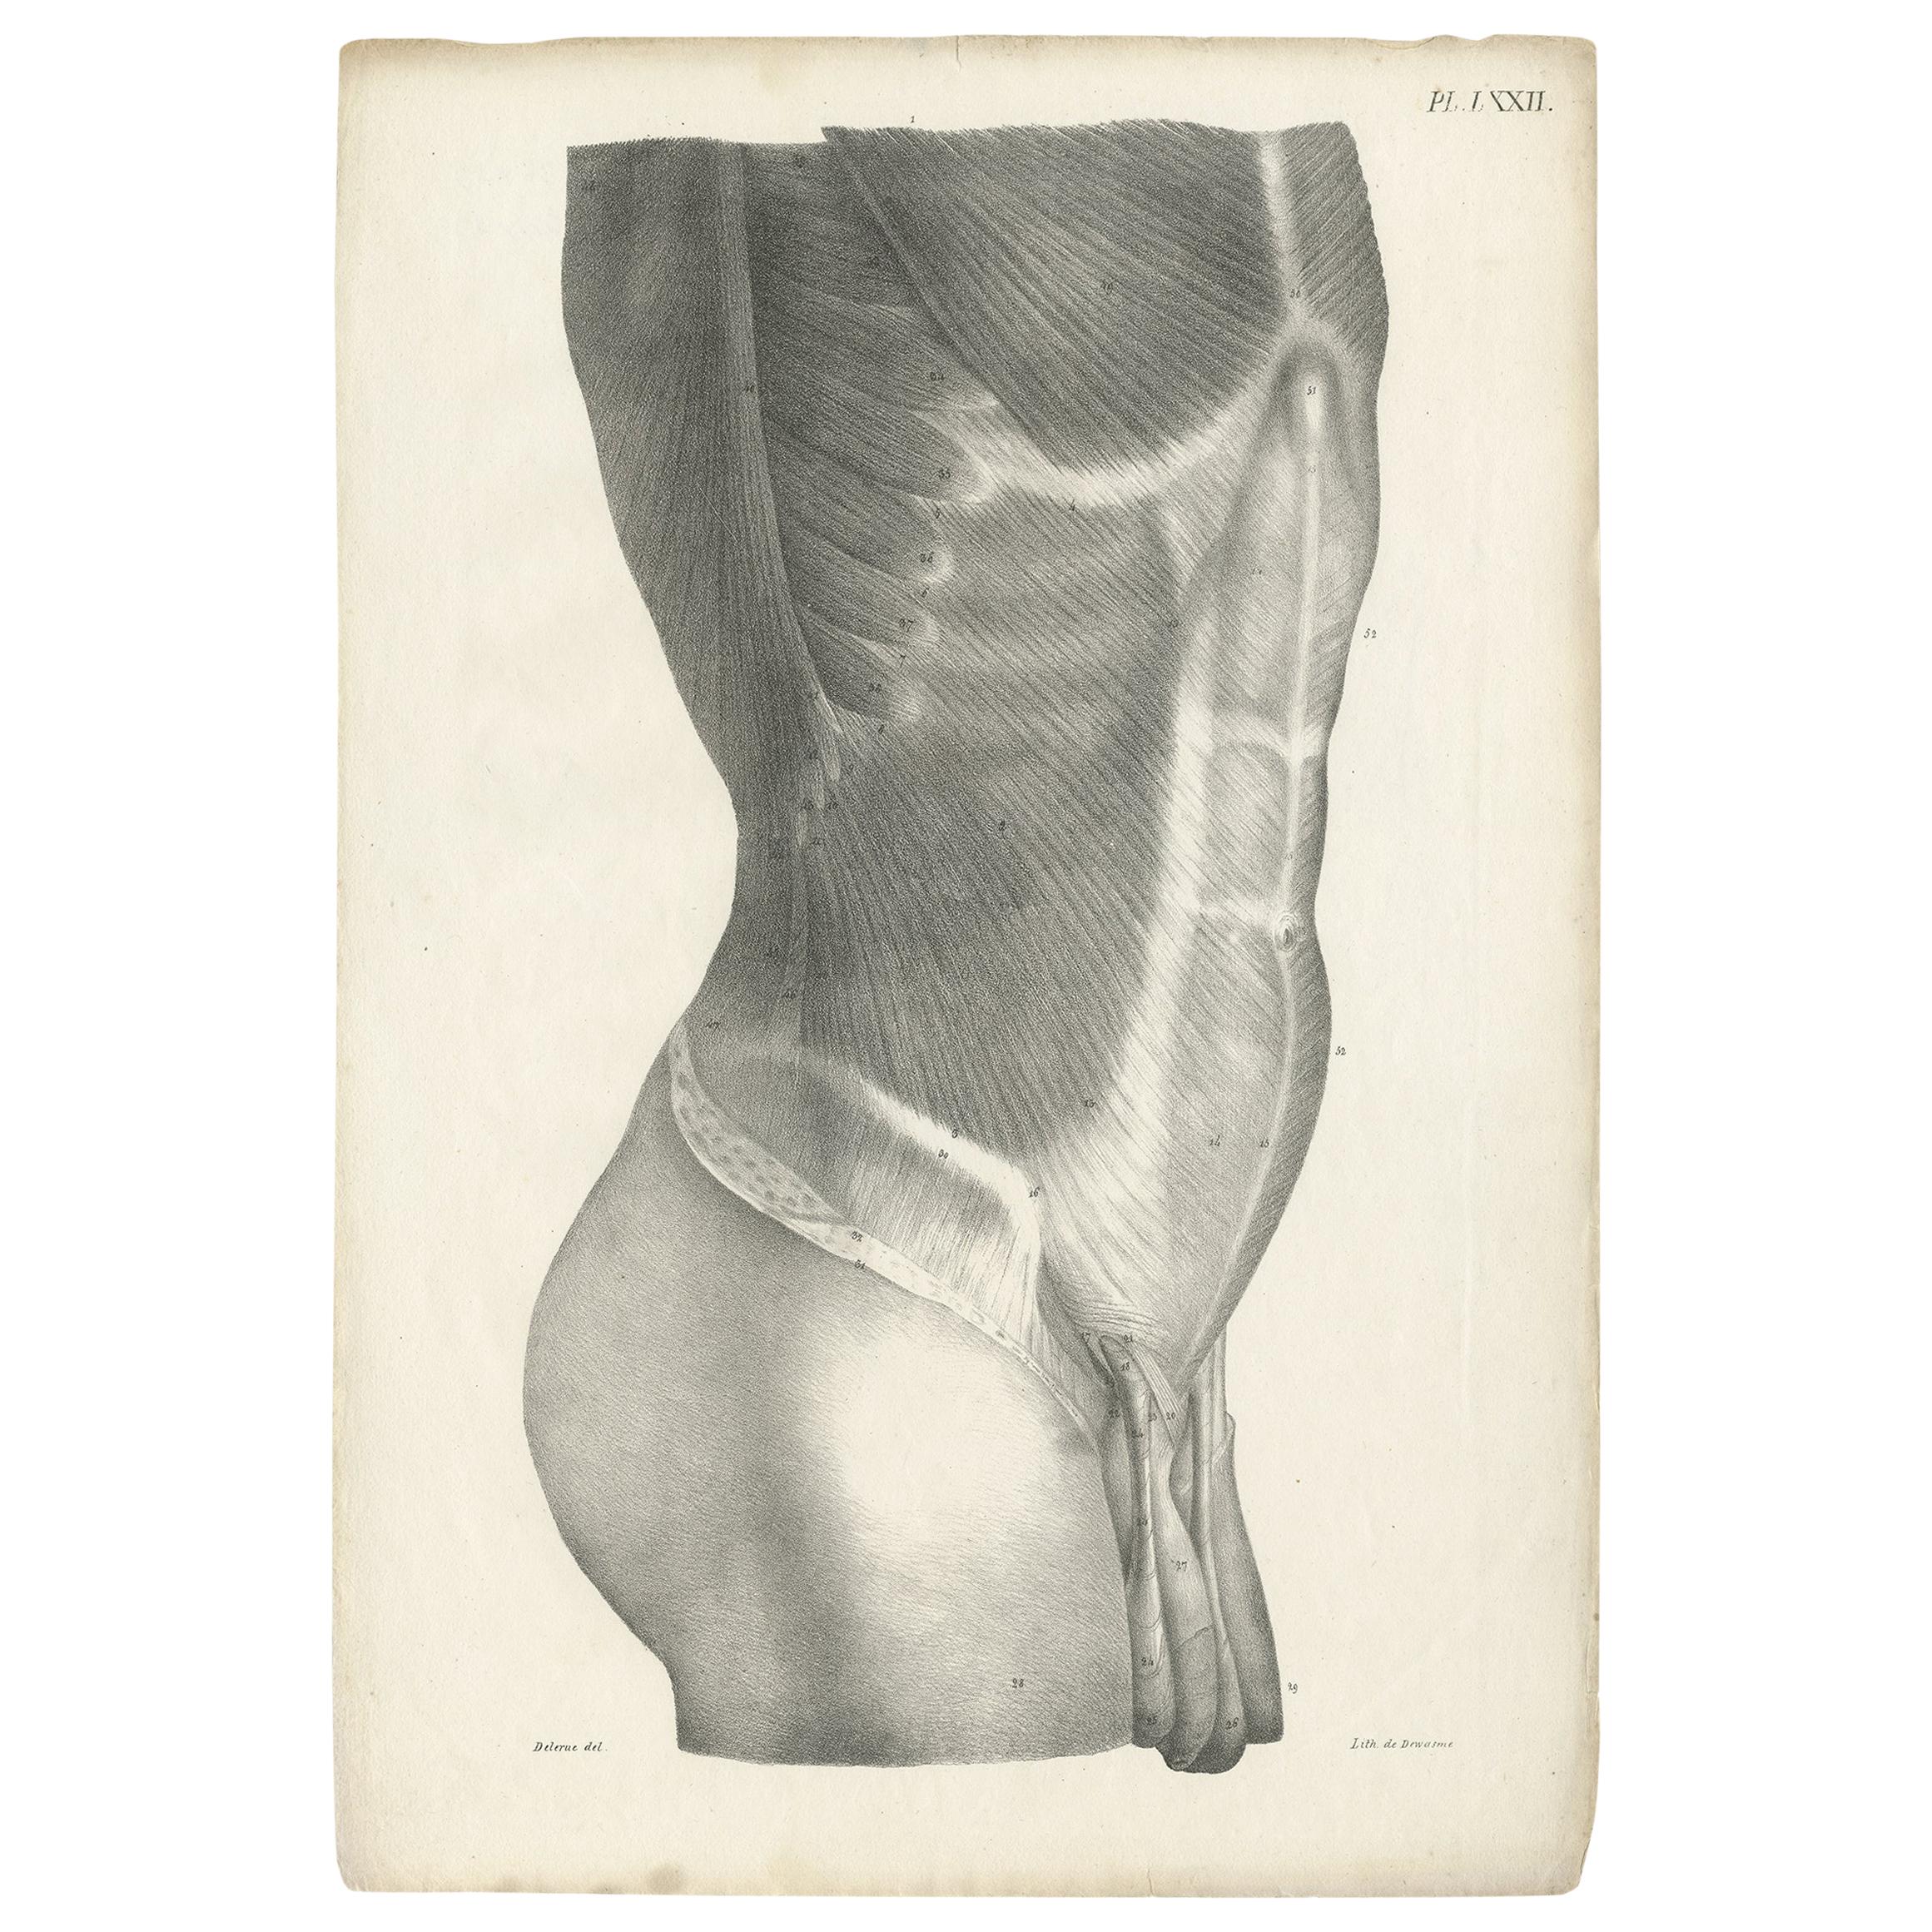 Pl. LXXII Antique Anatomy / Medical Print of the Male Torso by Cloquet '1821'